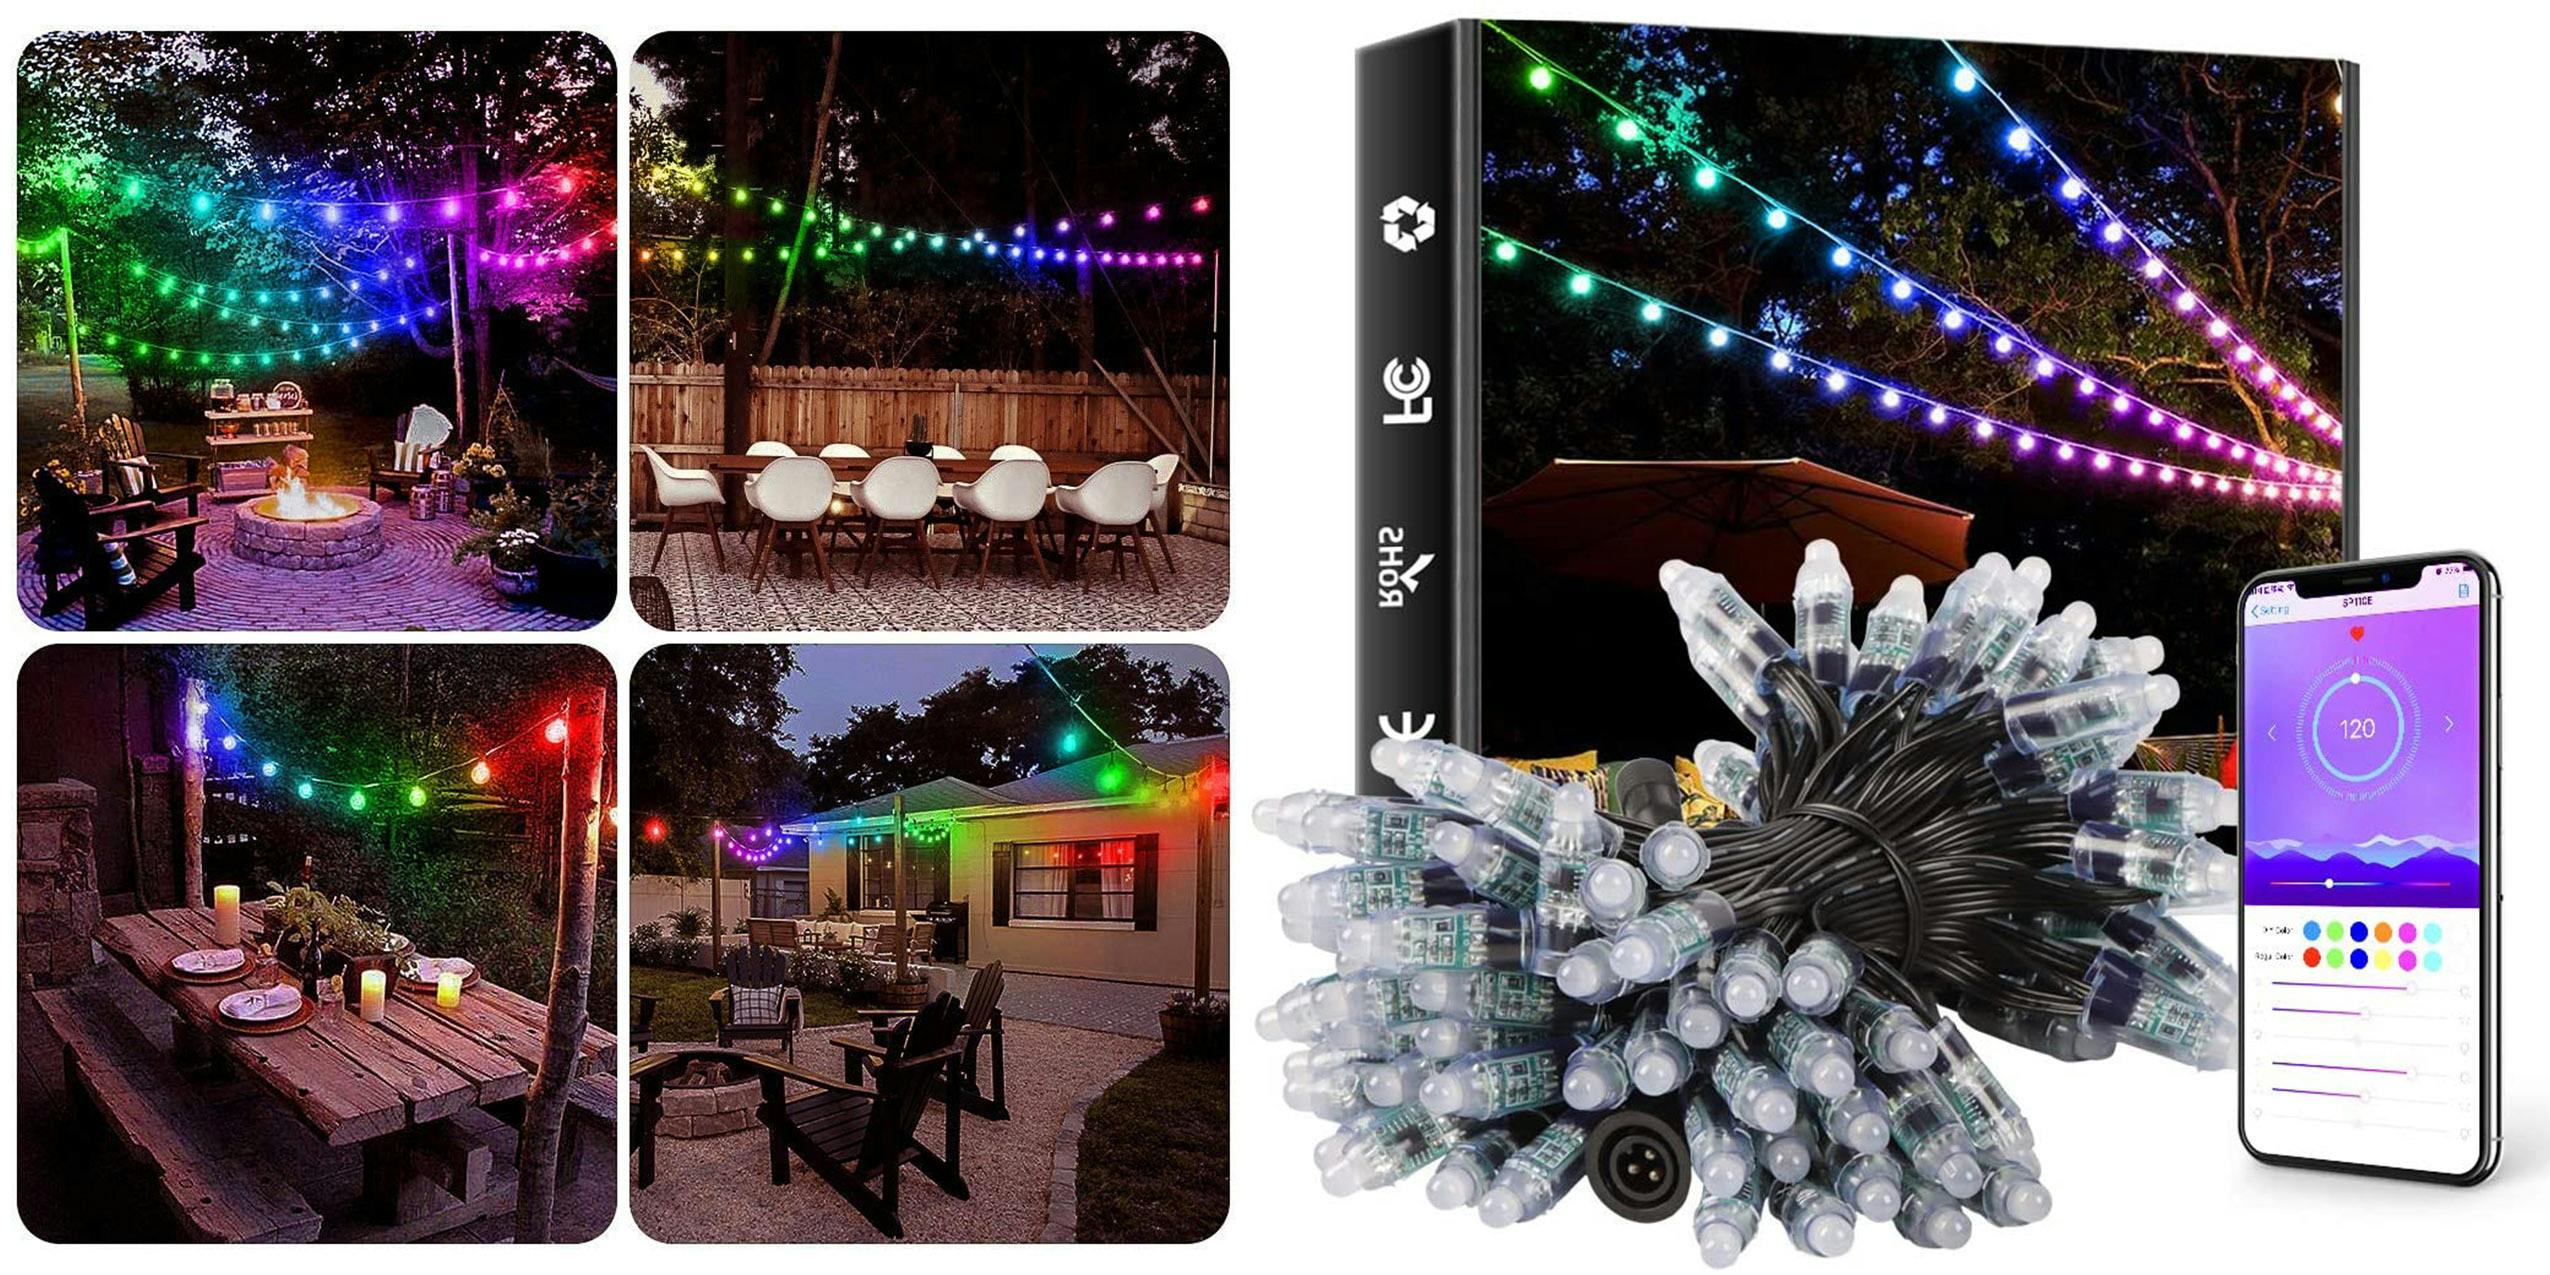 Elight Outdoor Smart Christmas Lights decorating the outdoors.